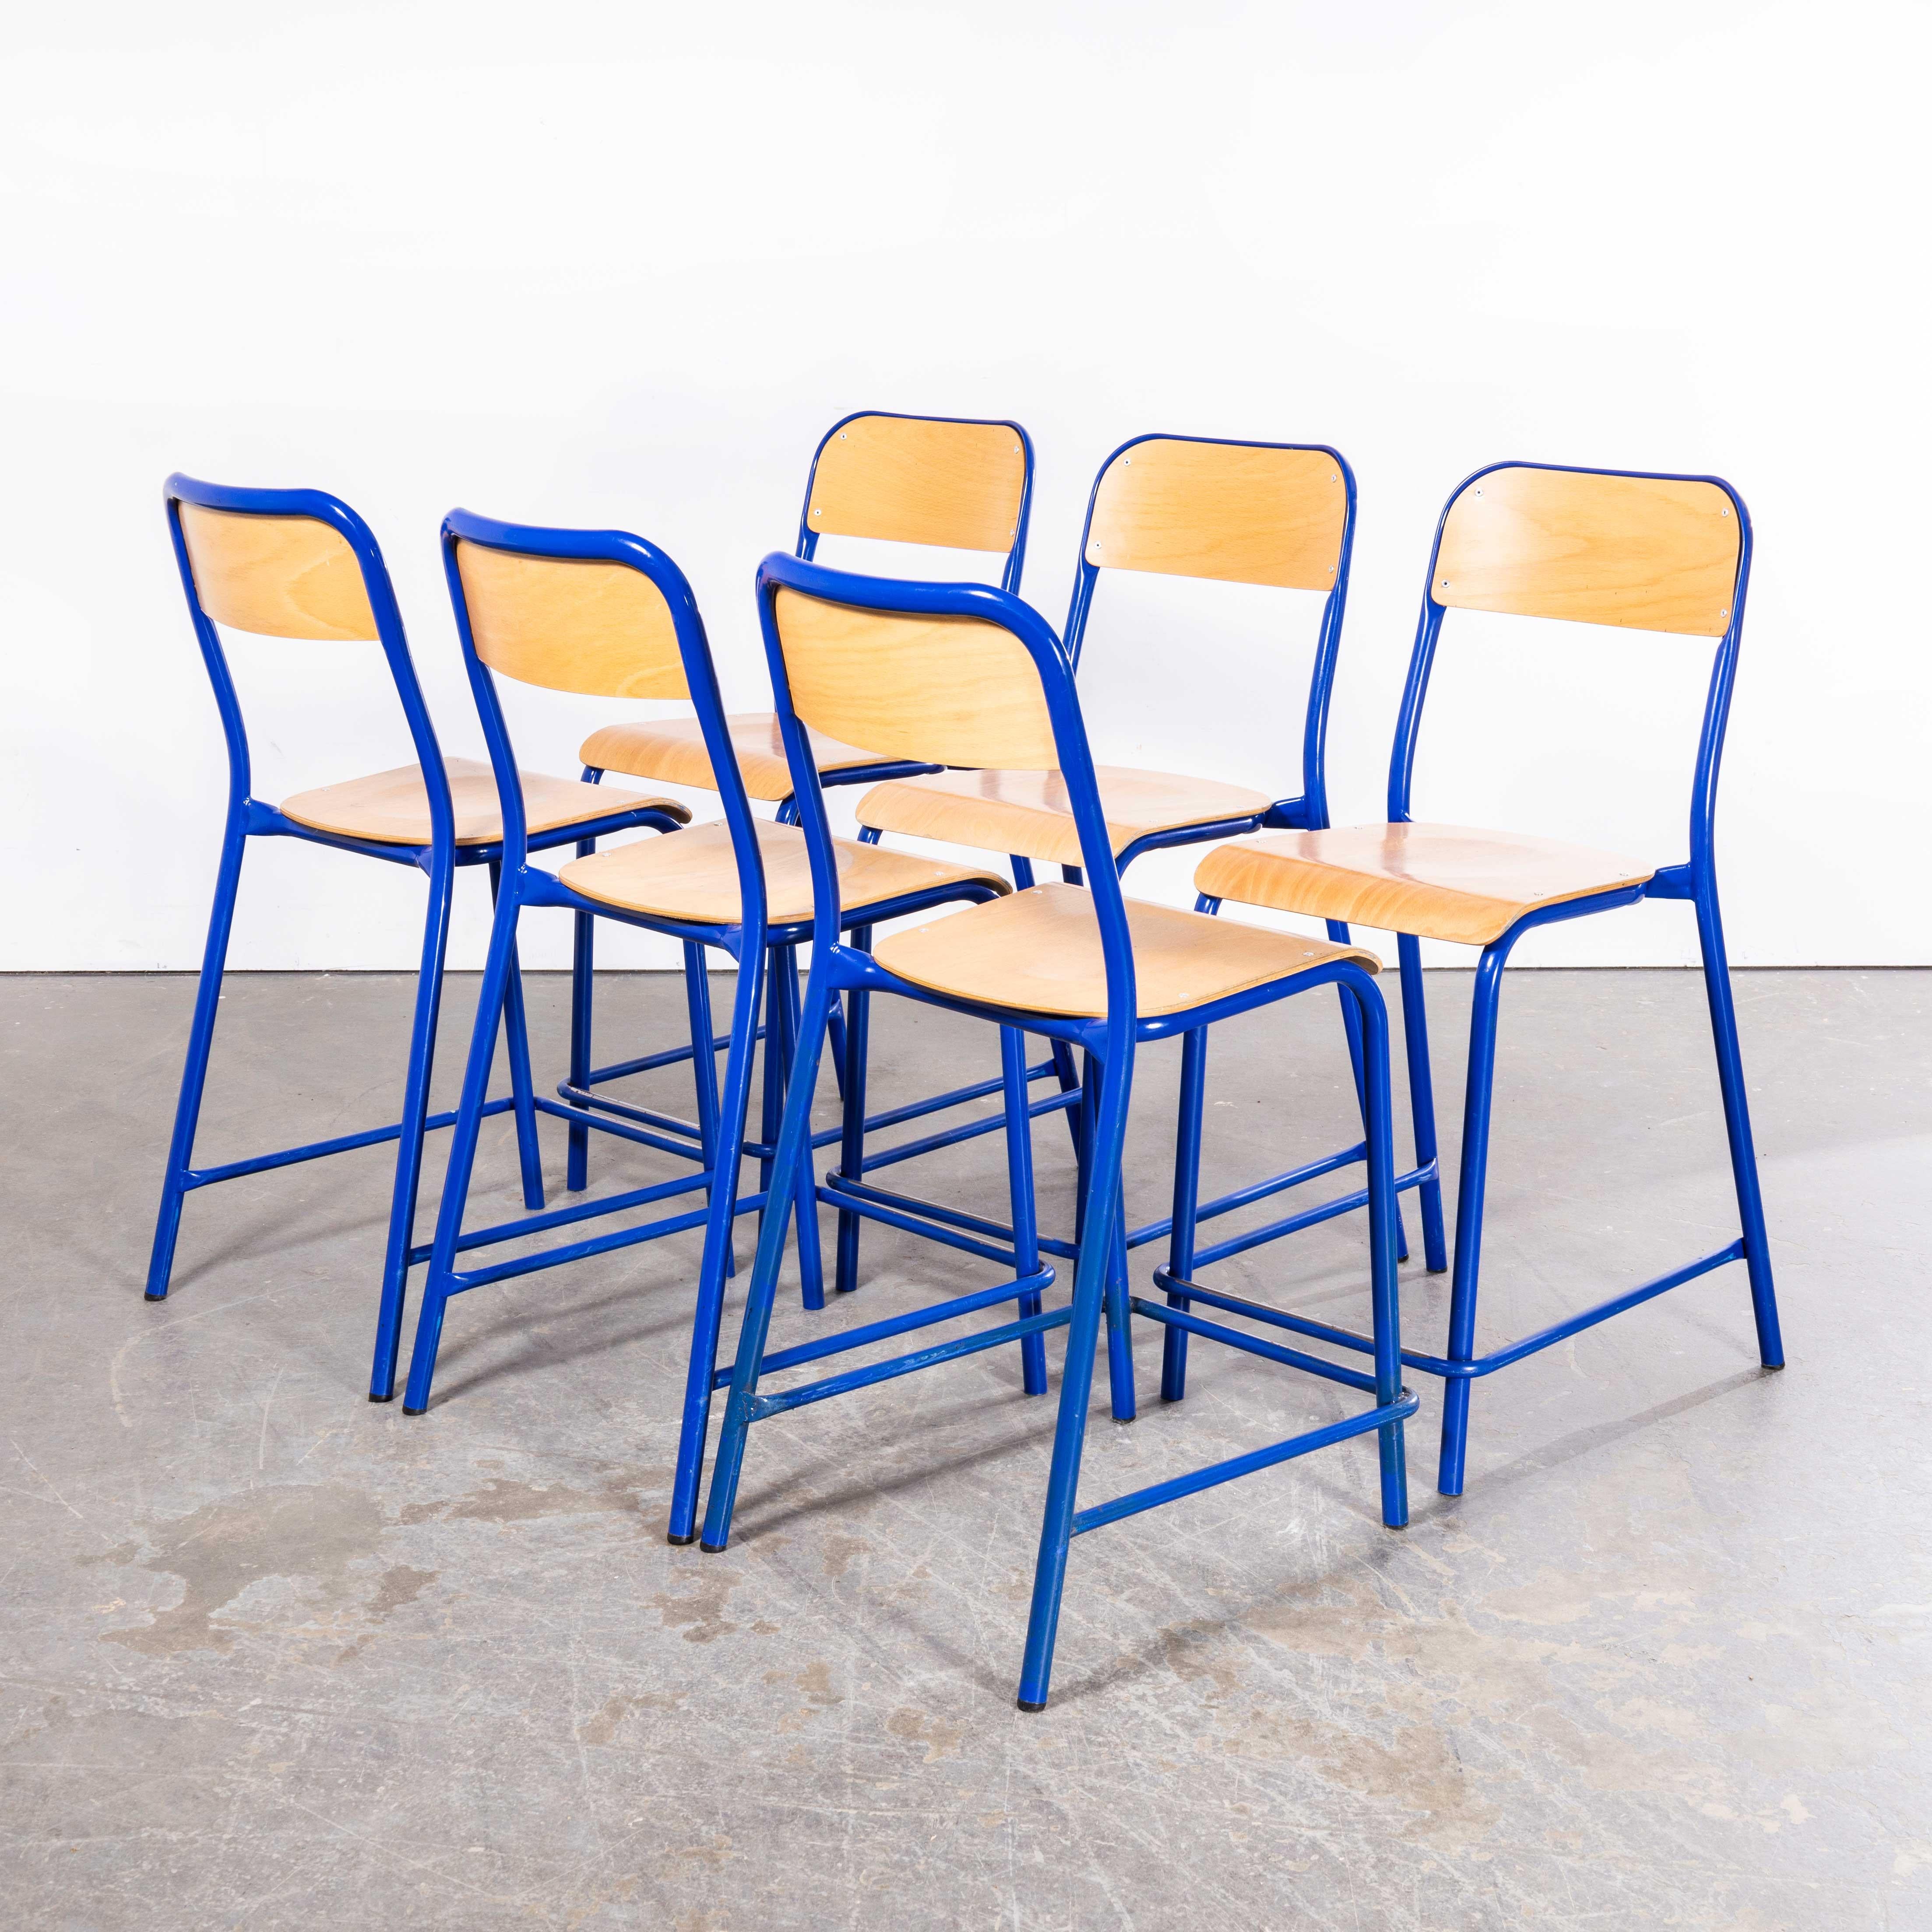 1970’s French Mullca Stacking D Back High Bar Chair – Blue – Set Of Six
1970’s French Mullca Stacking D Back High Bar Chair – Blue – Set Of Six. One of our most favourite chairs, in 1947 Robert Muller and Gaston Cavaillon created the company that